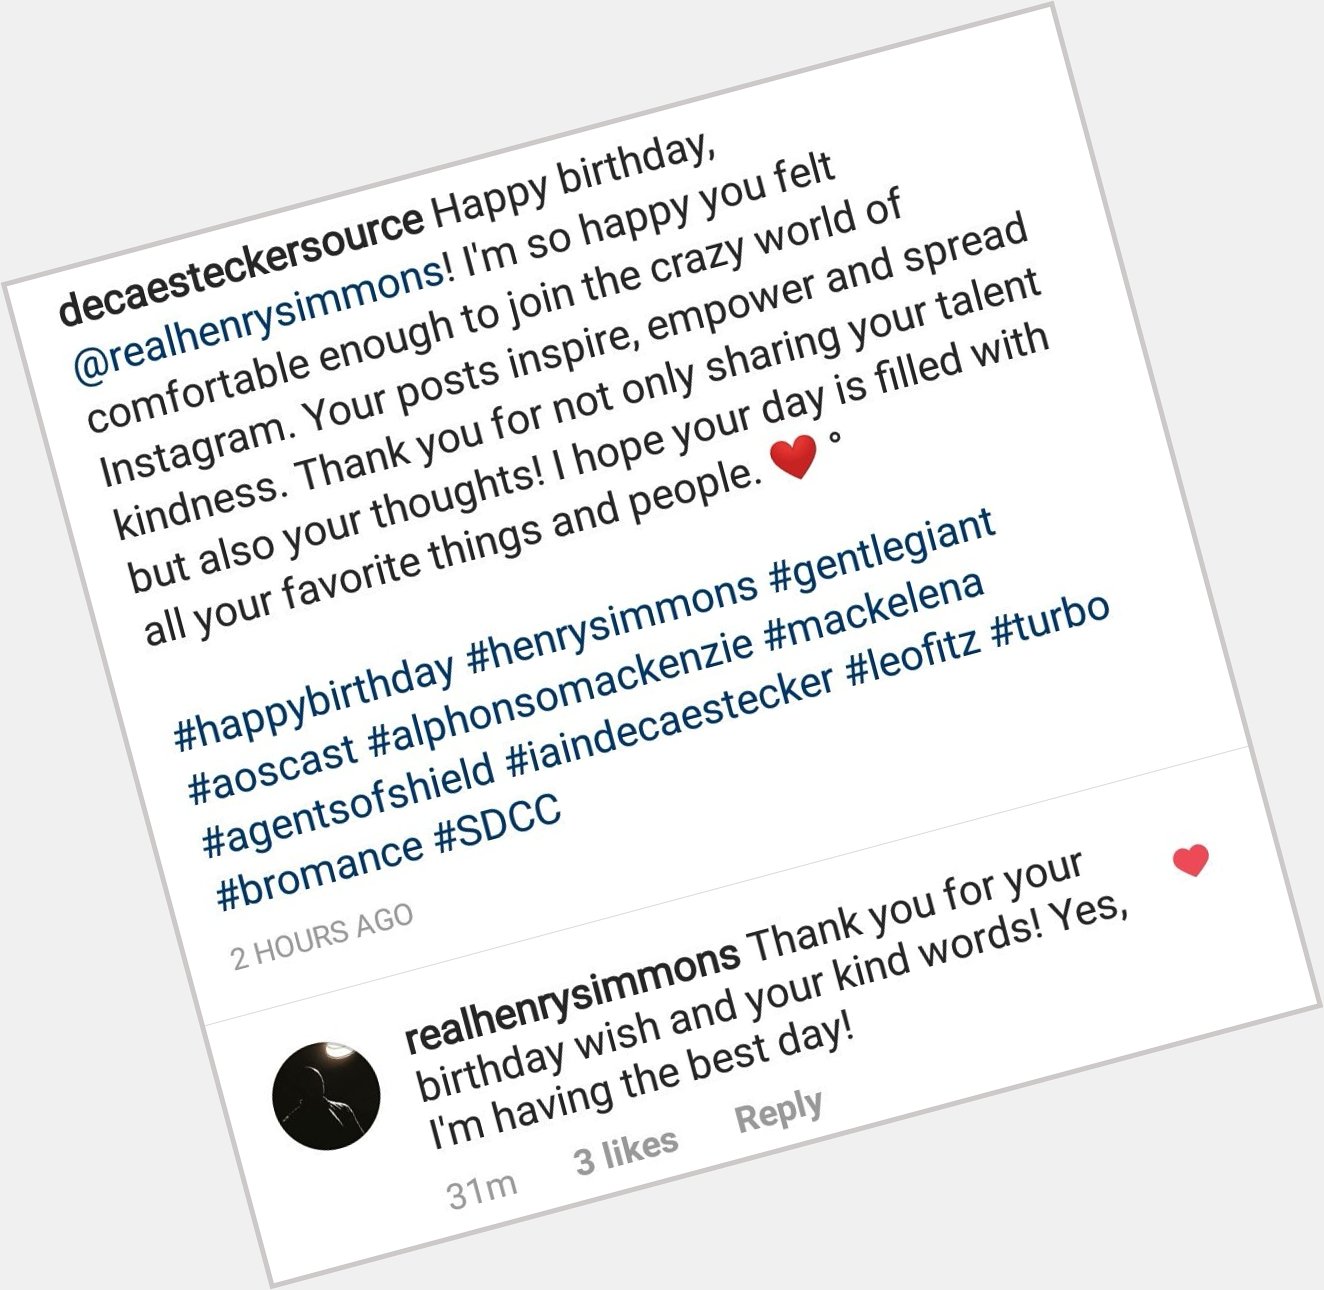 Henry Simmons personally responding to all his birthday wishes is so lovely. Happy he\s feeling the love. 